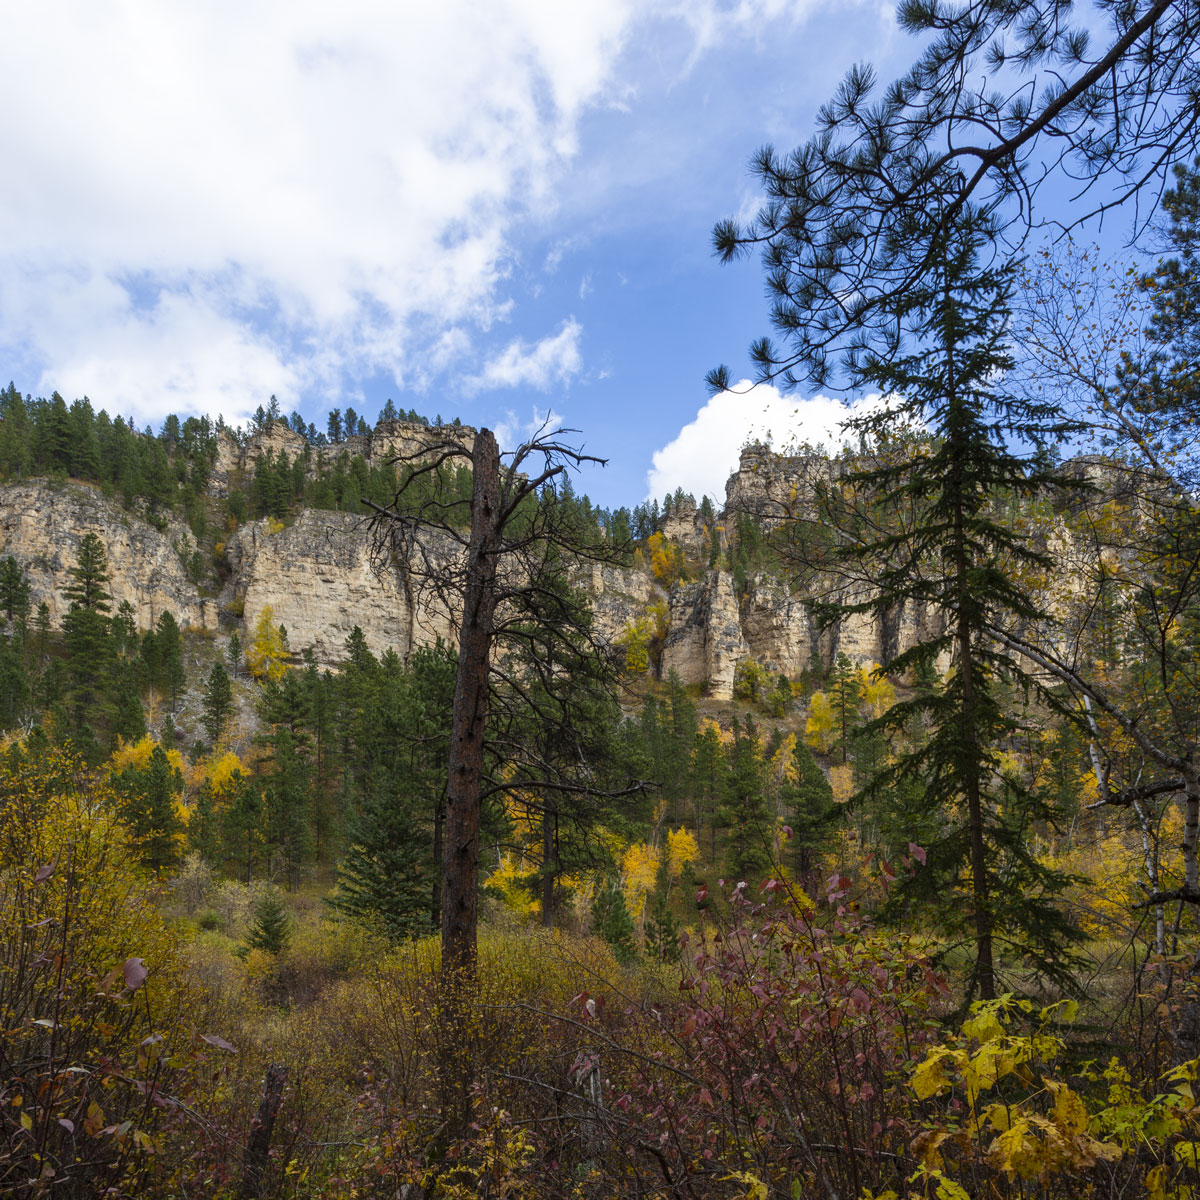 Limestone cliffs of Spearfish Canyon rise above yellow and green trees under a blue cloud filled sky.